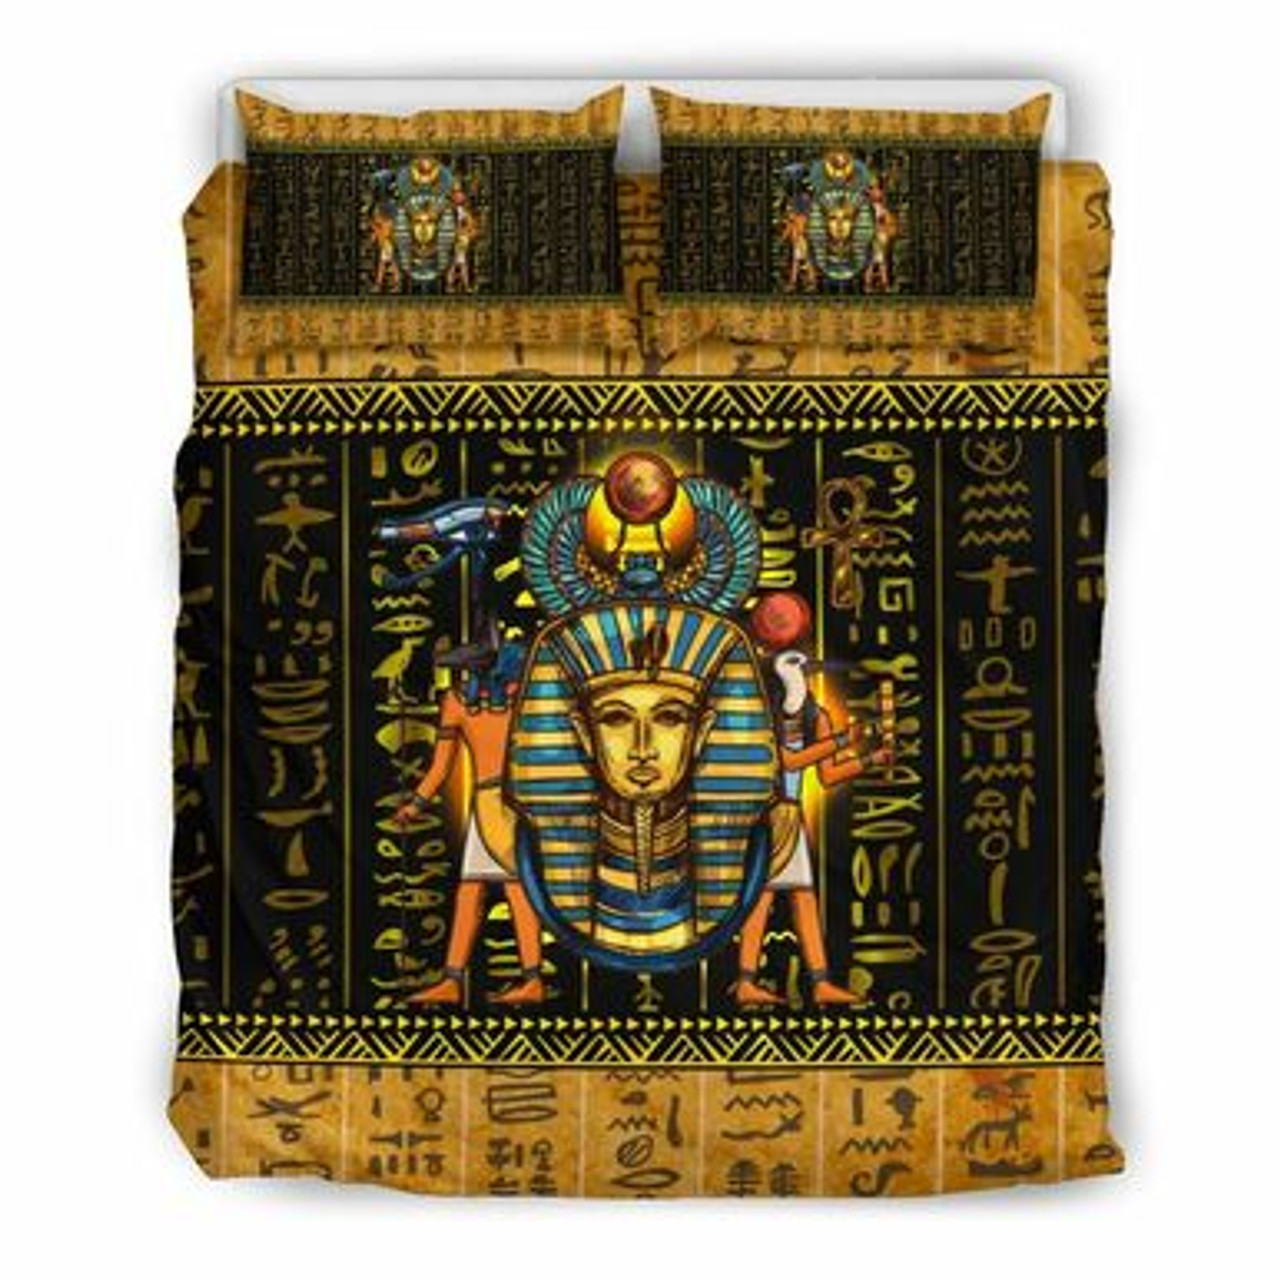 Egyptian Bedding Set - African Patterns Mysteries Of Ancient Egypt Bedding Set